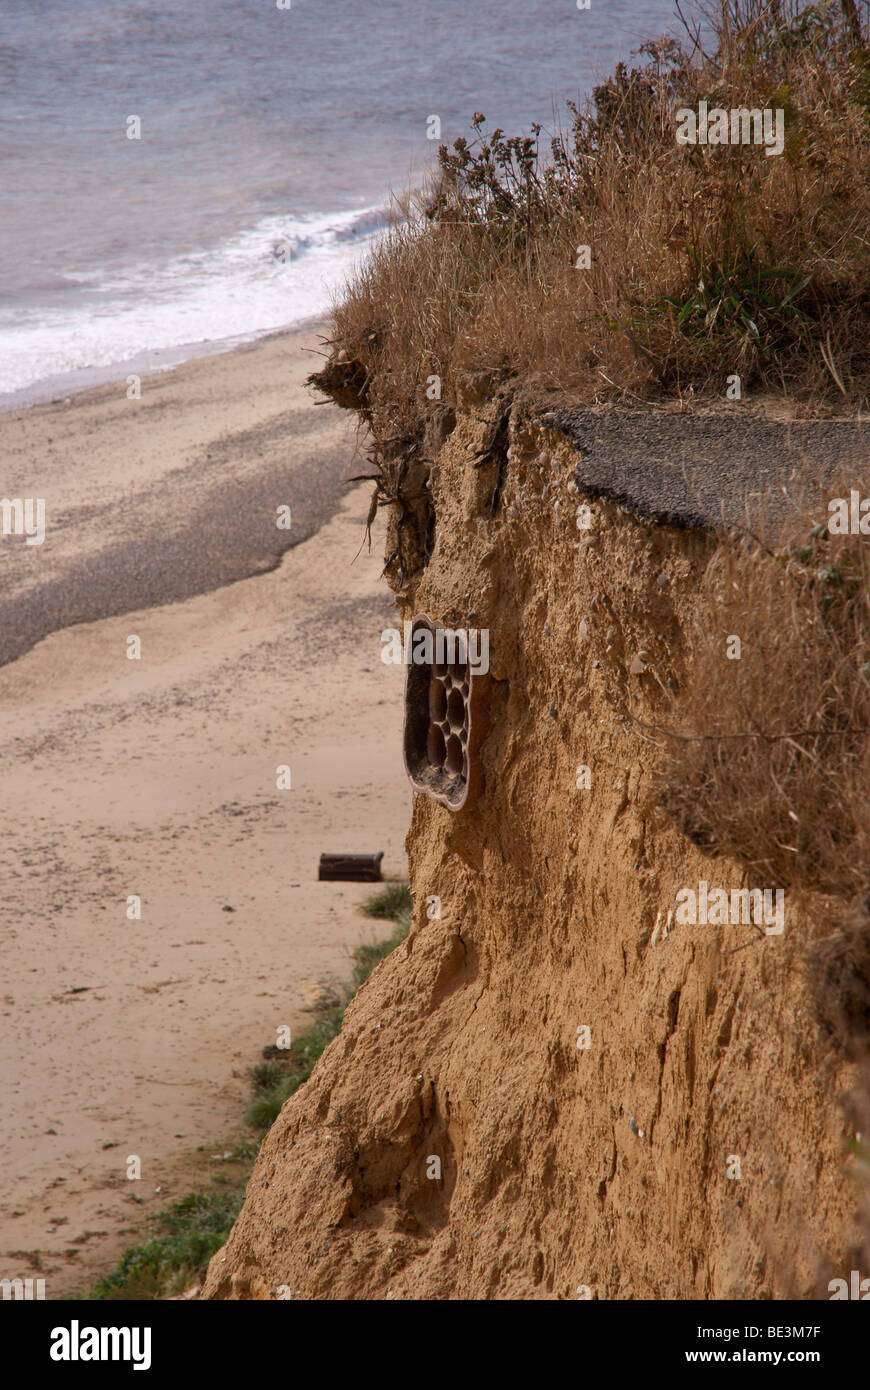 Coastal cliff erosion showing severed drains and roadway Stock Photo